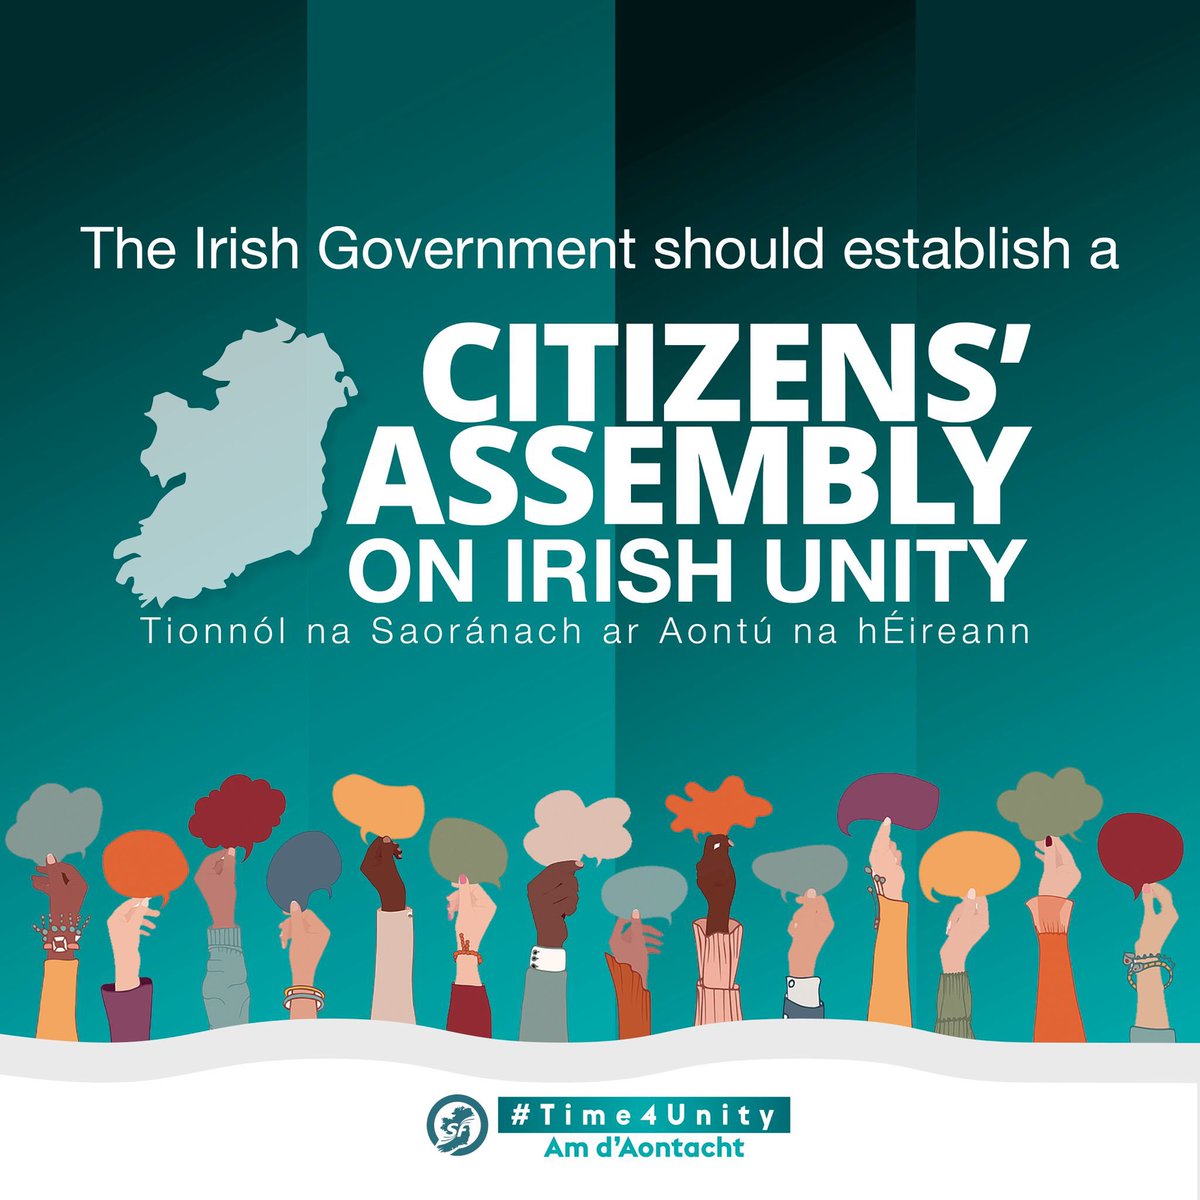 The call for the Irish Govt to establish a #CitizensAssembly on Irish Unity has been backed by local councils across Ireland with the most recent motions being passed last week in South Dublin & Cavan. 

This is crucially important in preparing the way for the unity referendums.